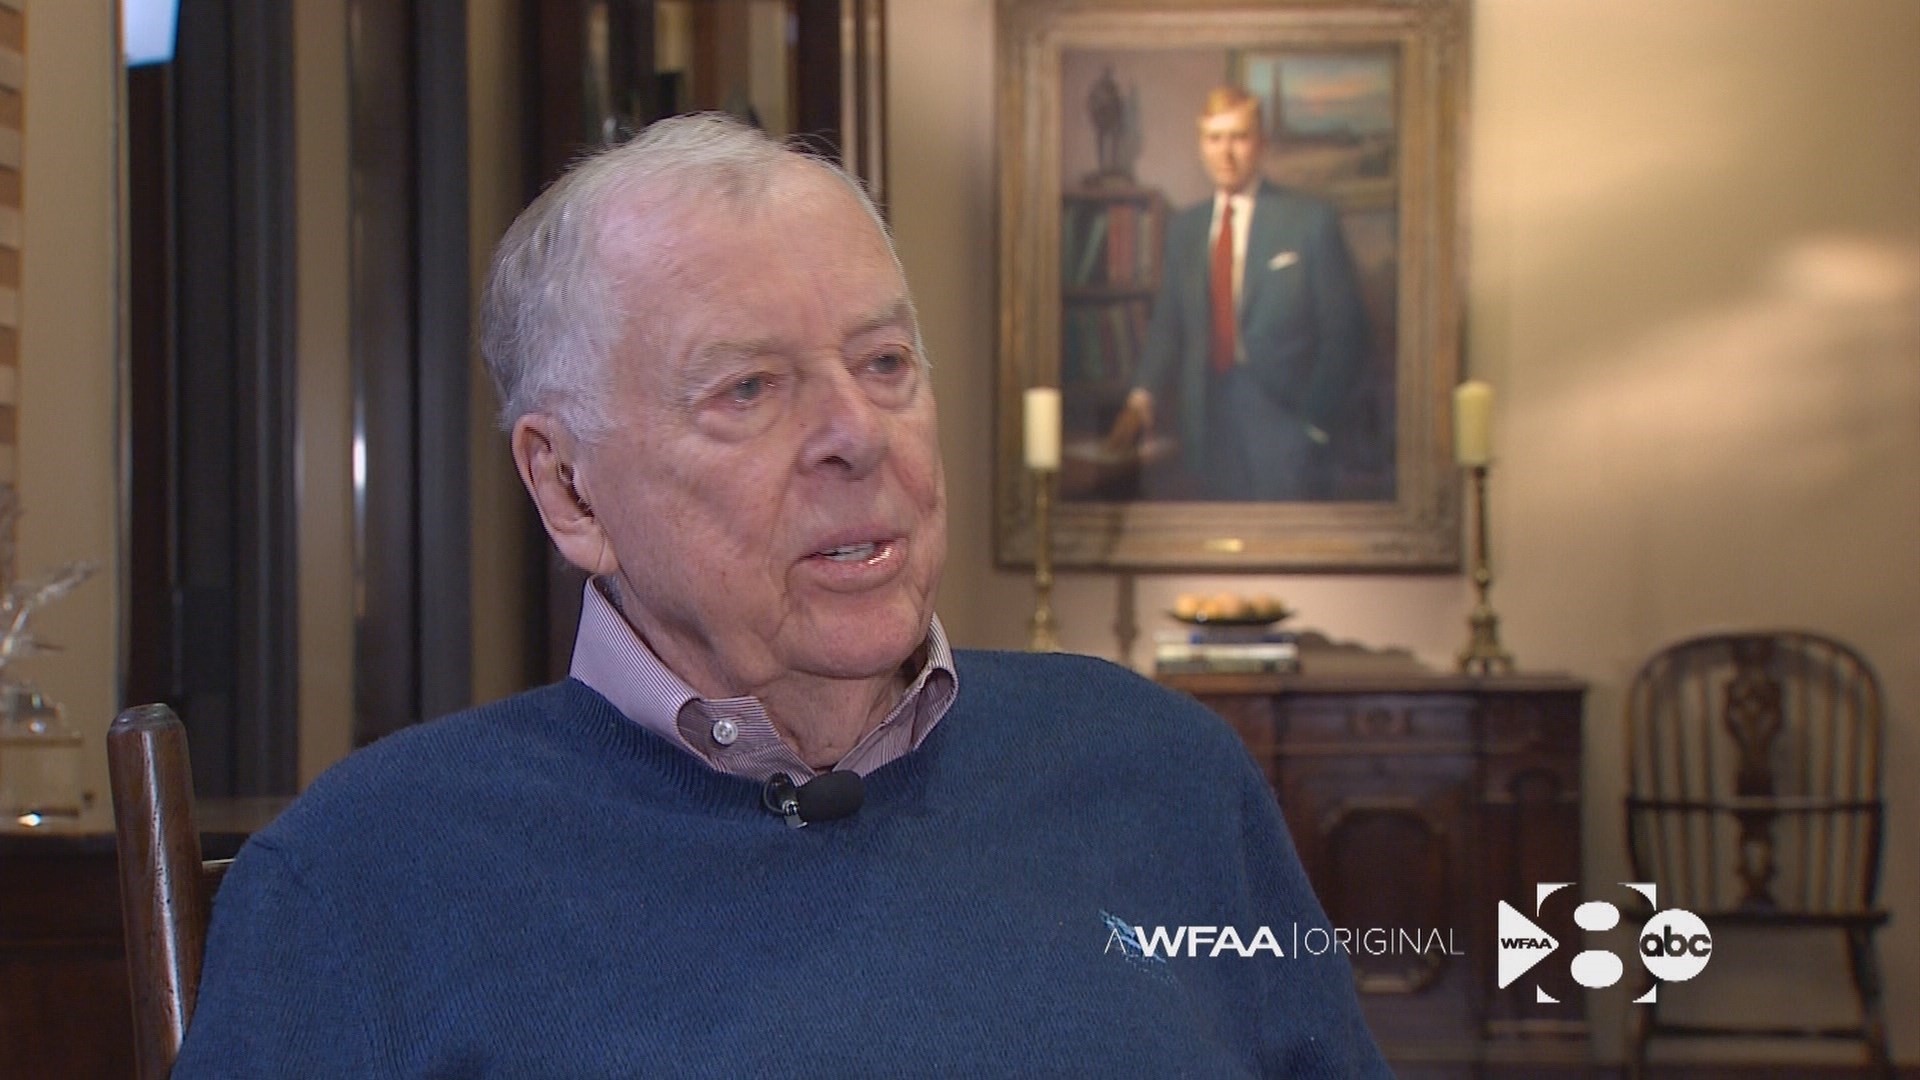 T. Boone Pickens shares life stories with Pete Delkus.